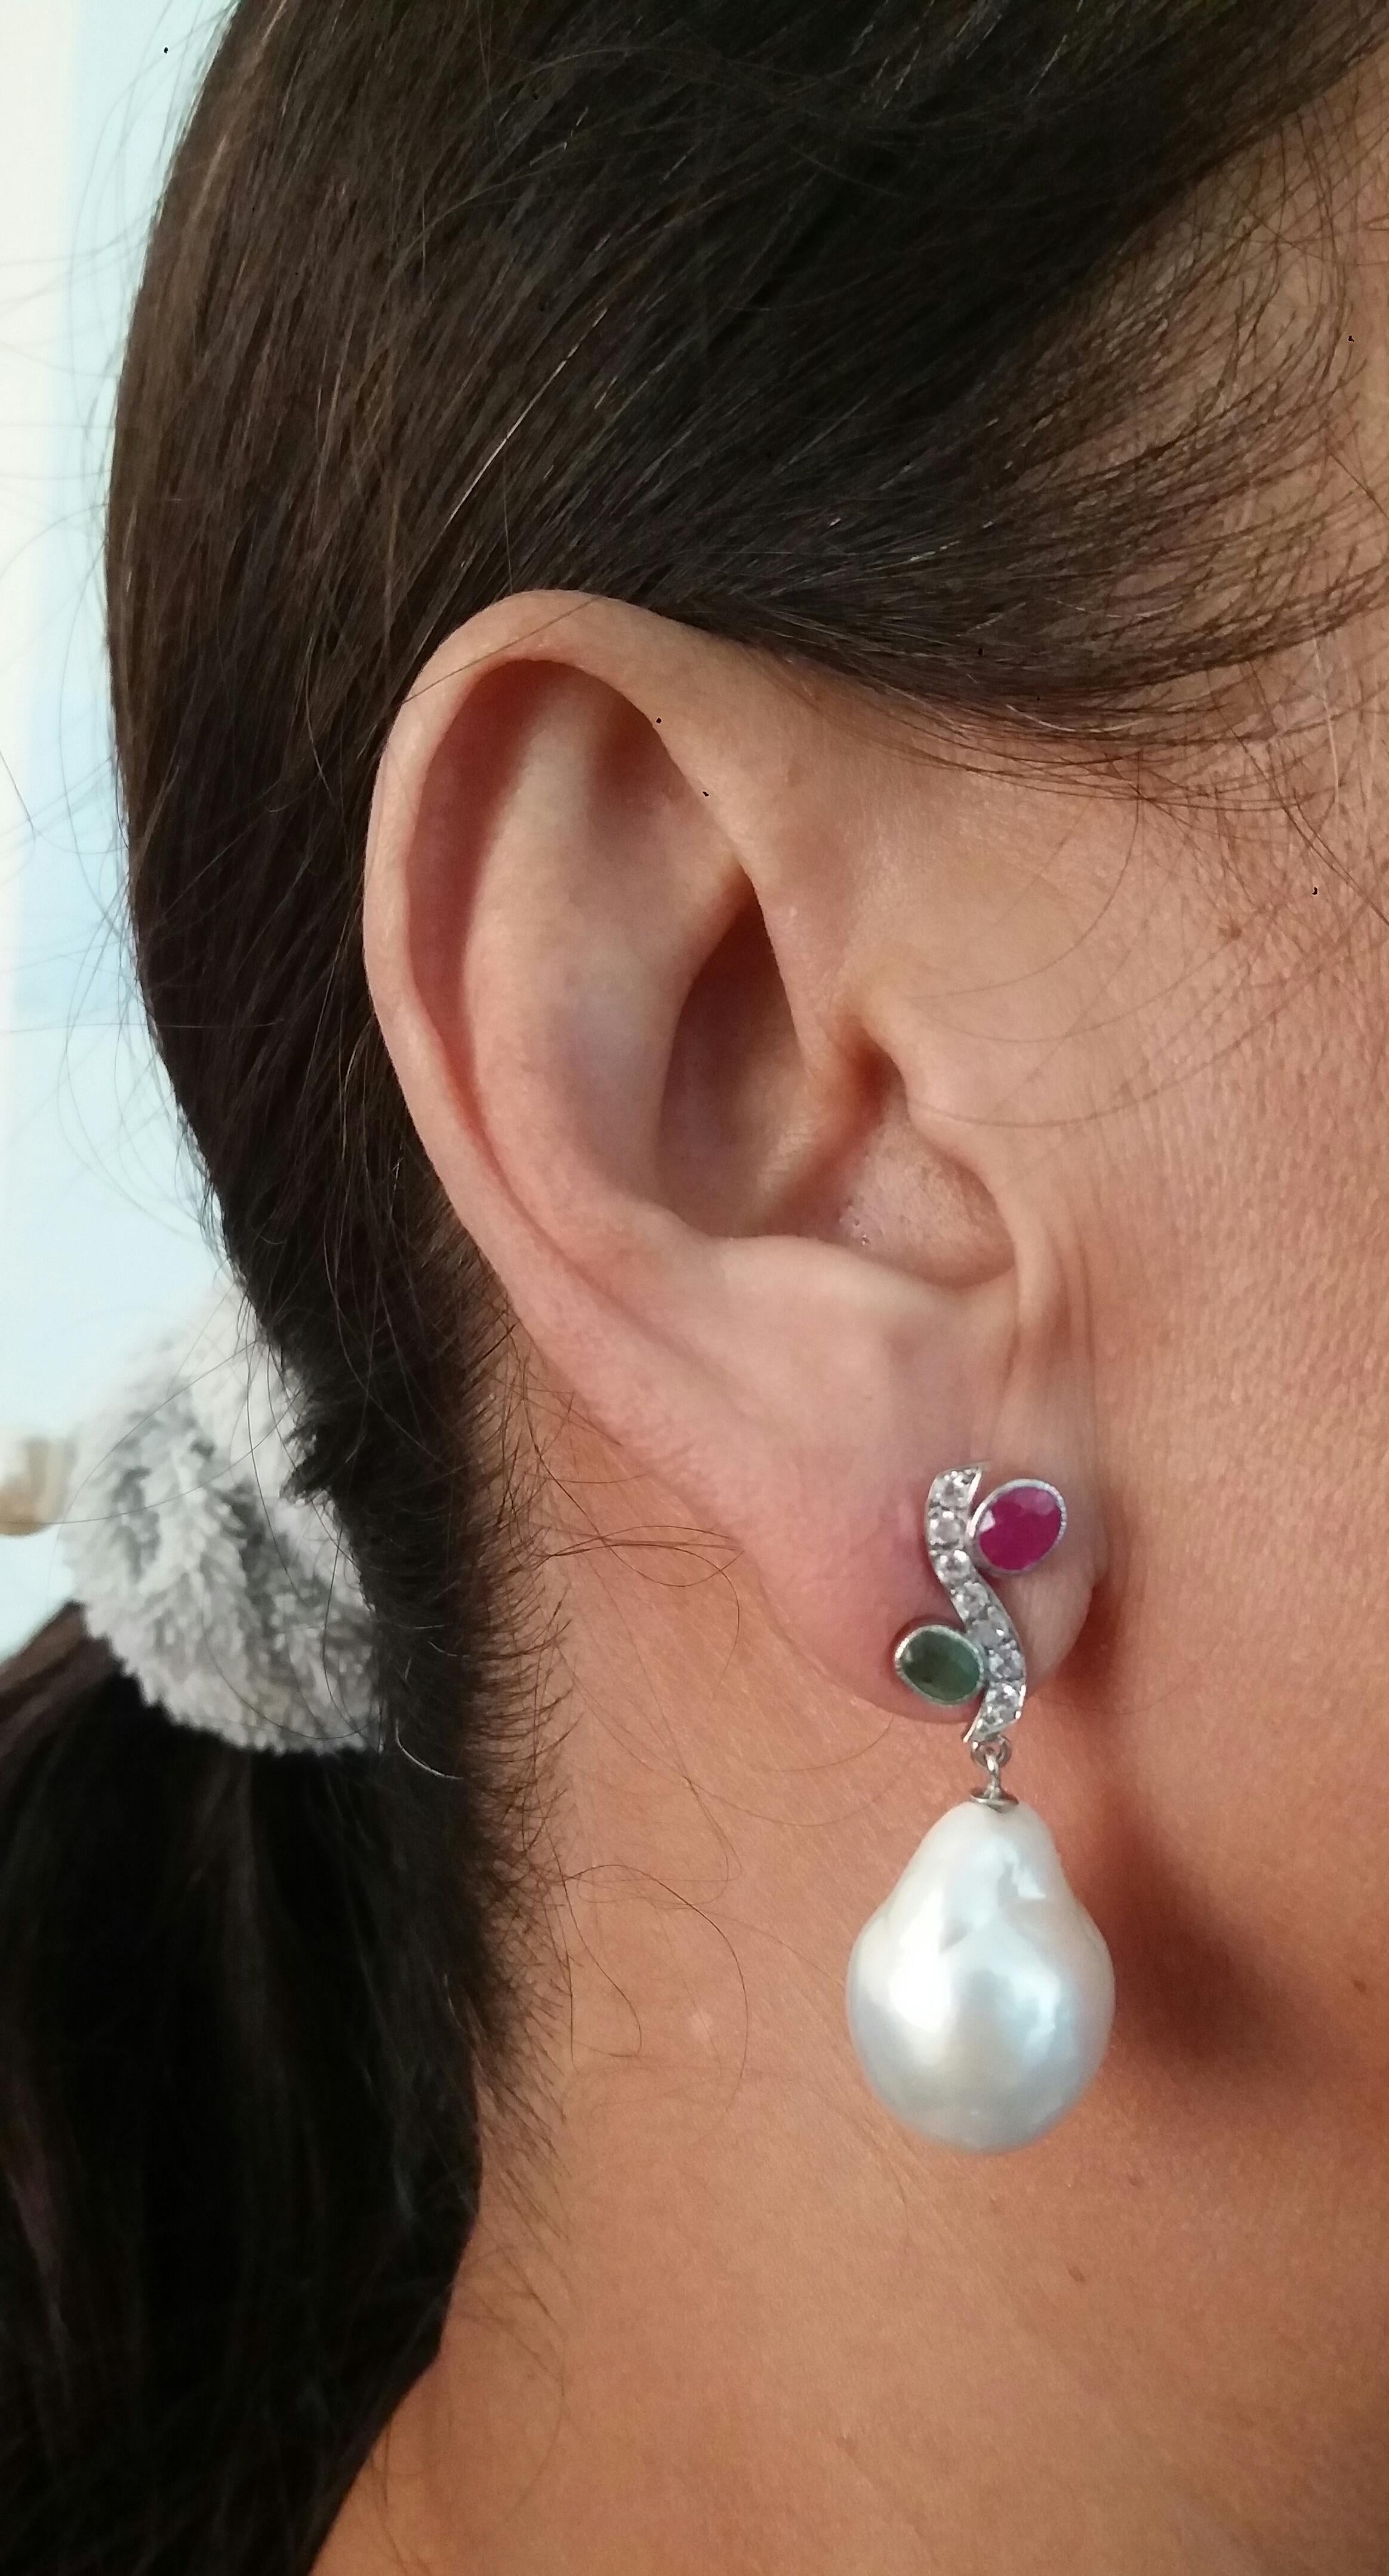 In these classic Tutti Frutti Style earrings the tops are 2 White Gold and Diamonds  Branches, 14 round full cut diamonds weighing 0,14 carats,and 3 pairs of faceted 4x5 mm. Rubies ,Emeralds,in the lower parts we have 2 high luster White Baroque